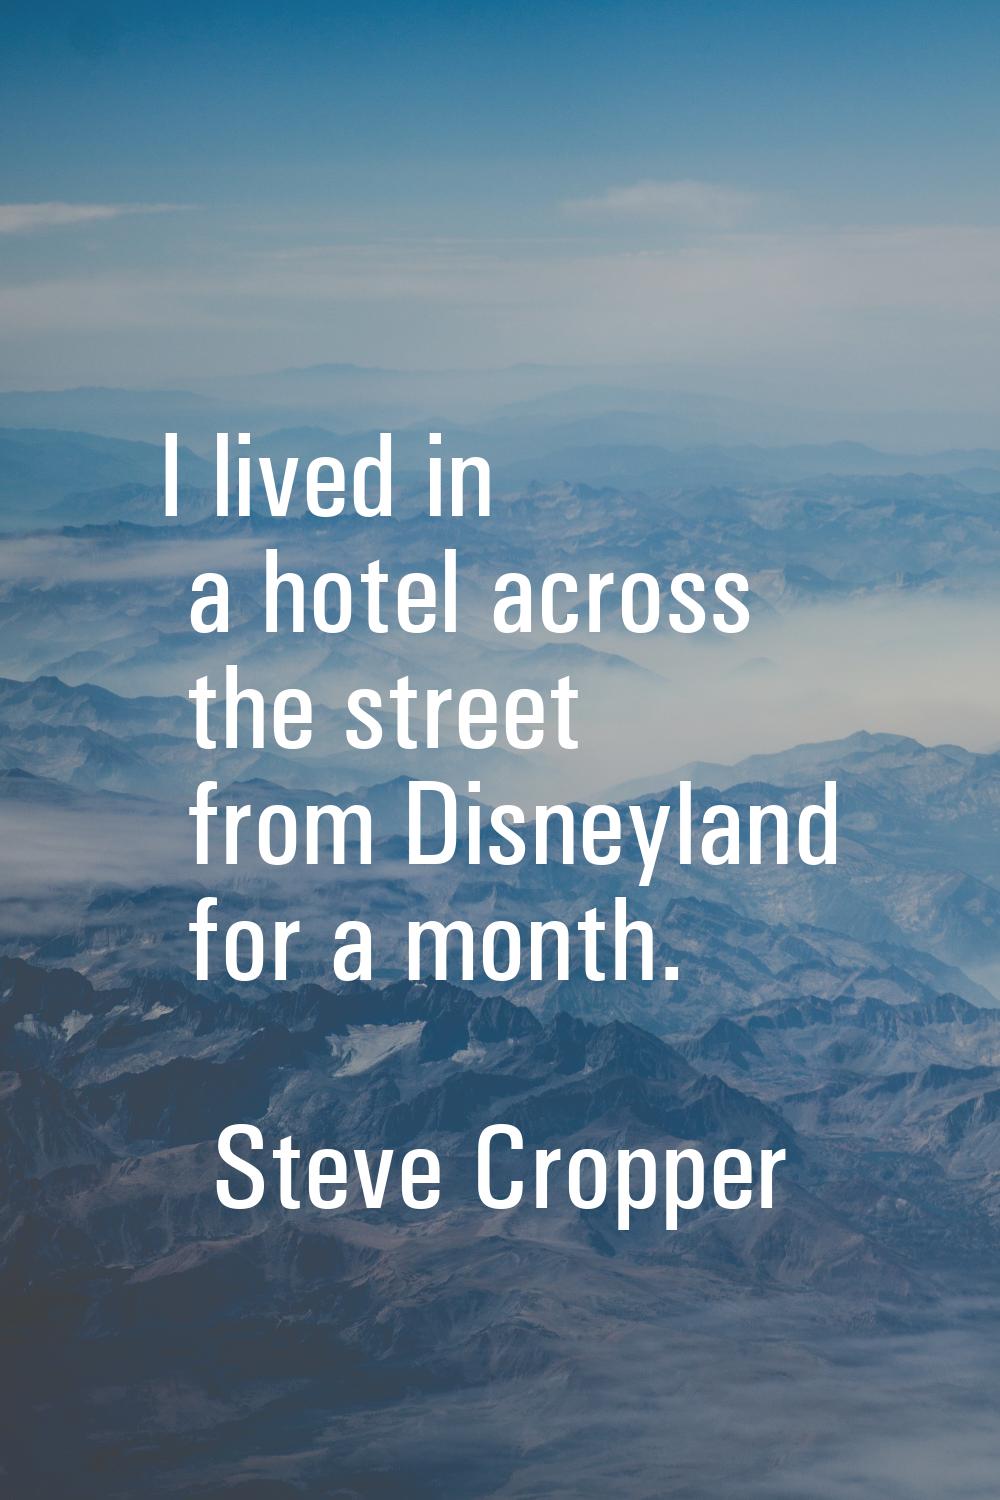 I lived in a hotel across the street from Disneyland for a month.